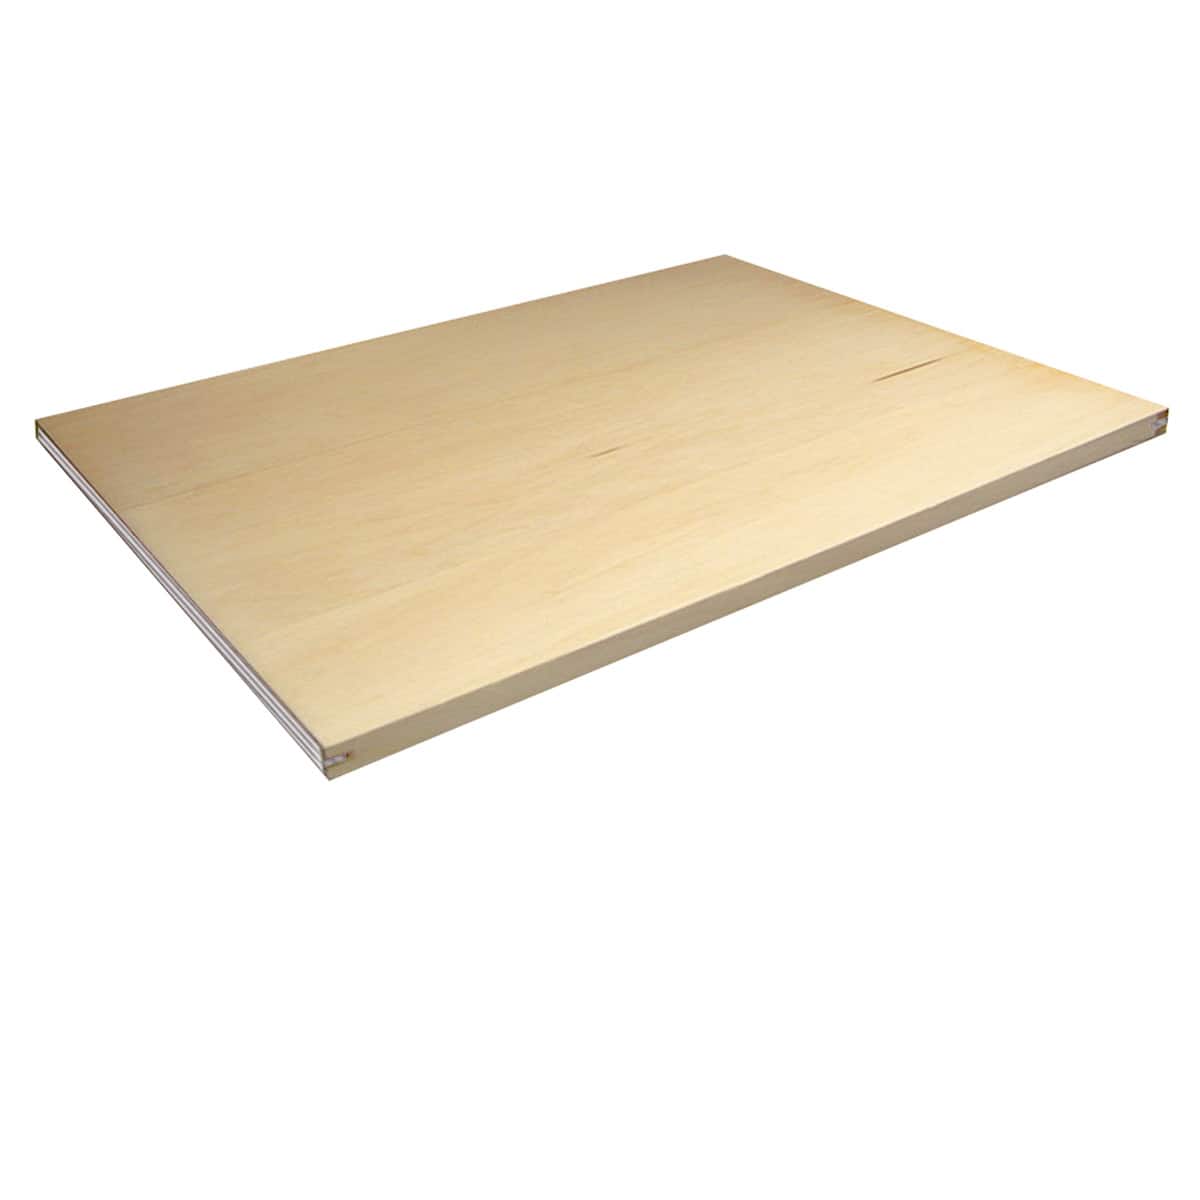 Staedtler® Portable Wooden Drawing Board with Metal Edge